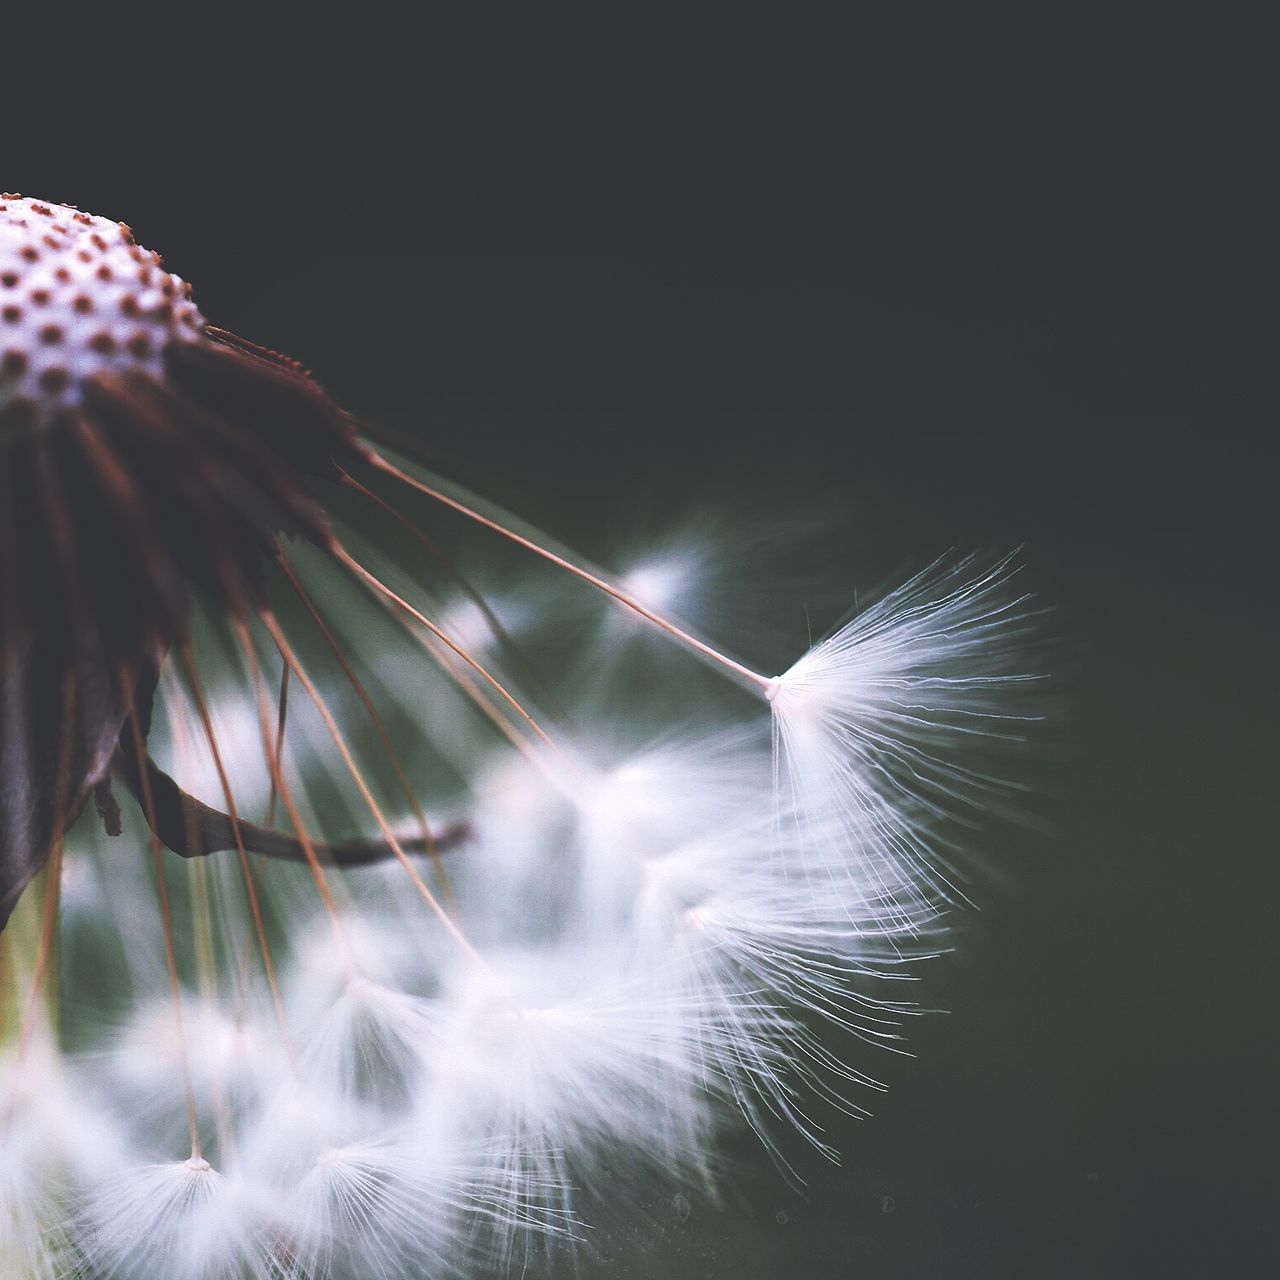 fragility, macro photography, softness, flower, plant, dandelion, beauty in nature, nature, close-up, no people, flowering plant, leaf, freshness, dandelion seed, growth, white, outdoors, copy space, studio shot, feather, sparkler, light, seed, fireworks